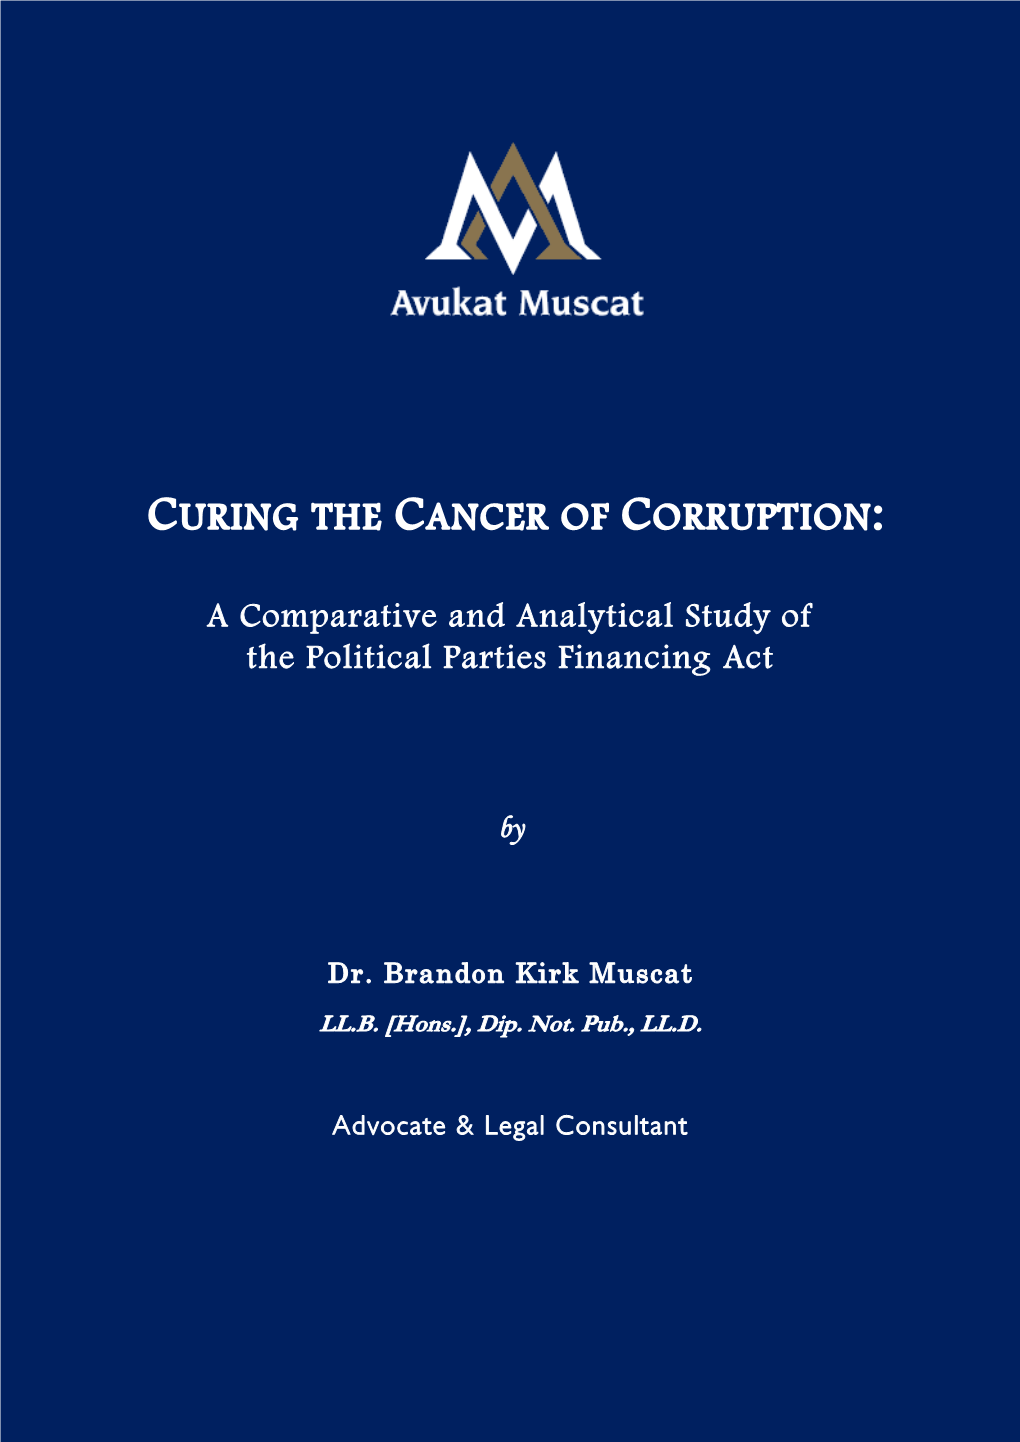 A Comparative and Analytical Study of the Political Parties Financing Act